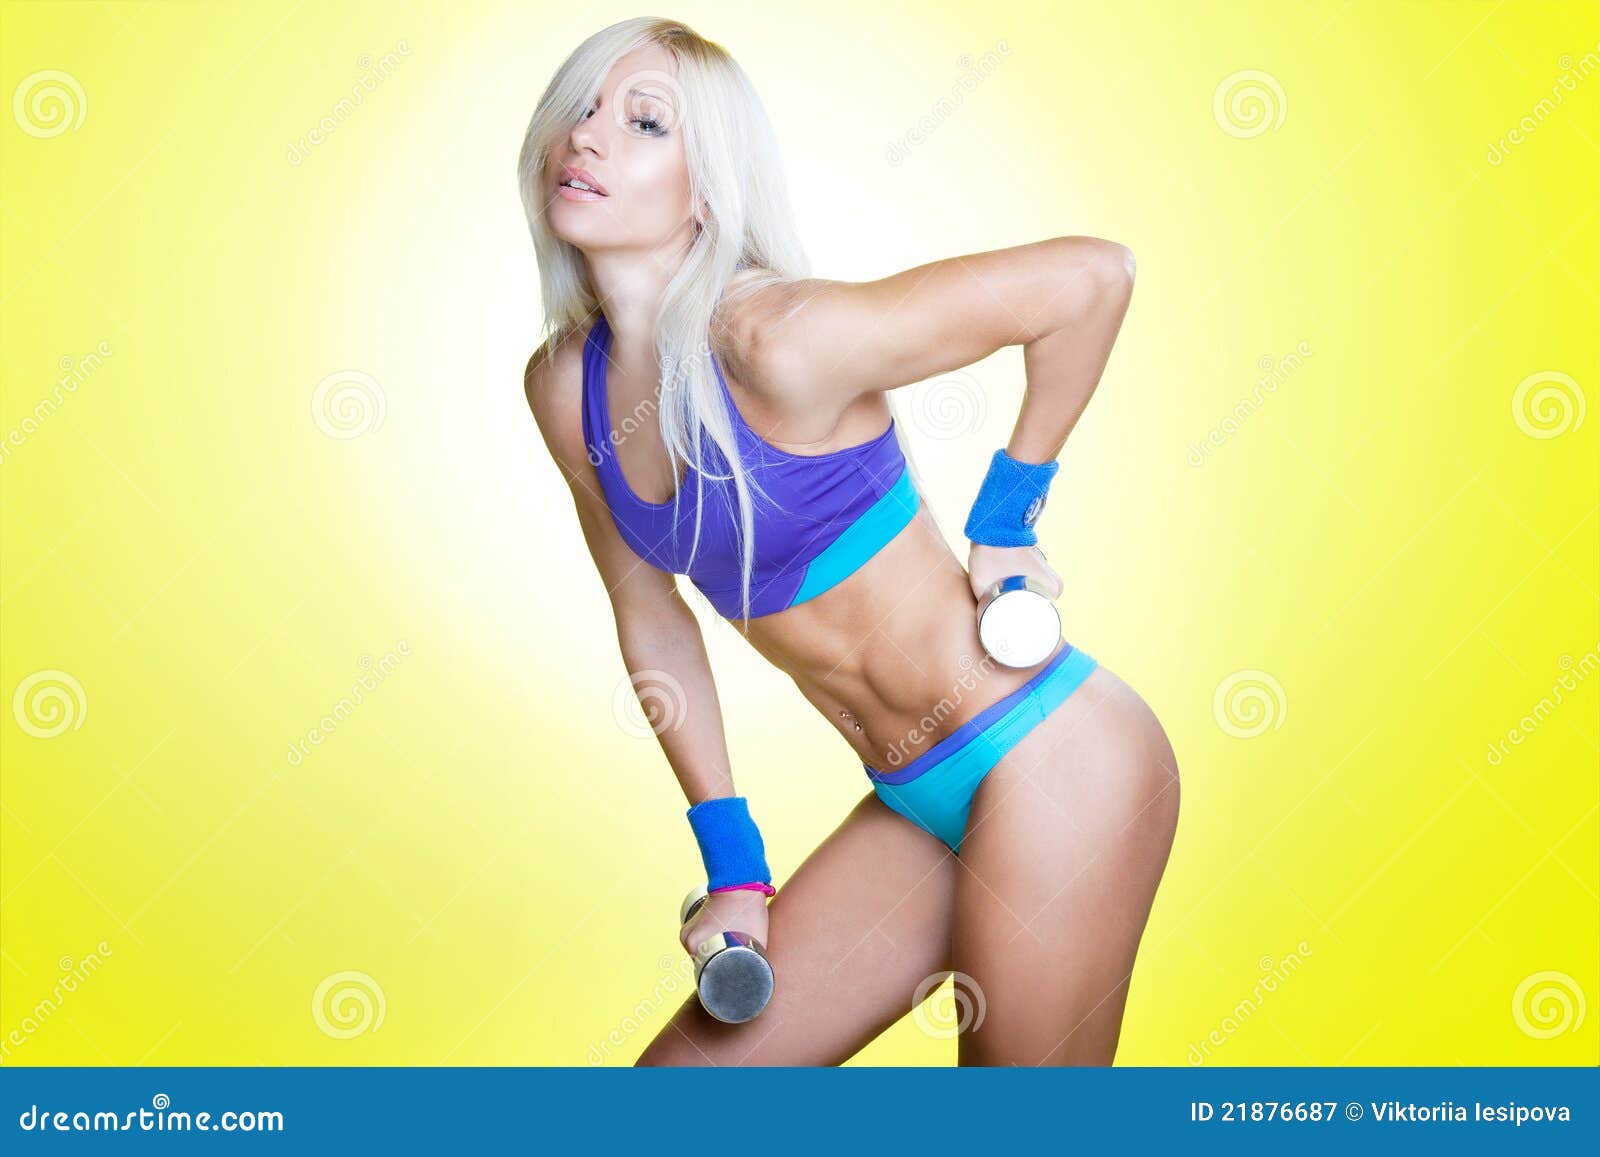 Blonde Working Out 50